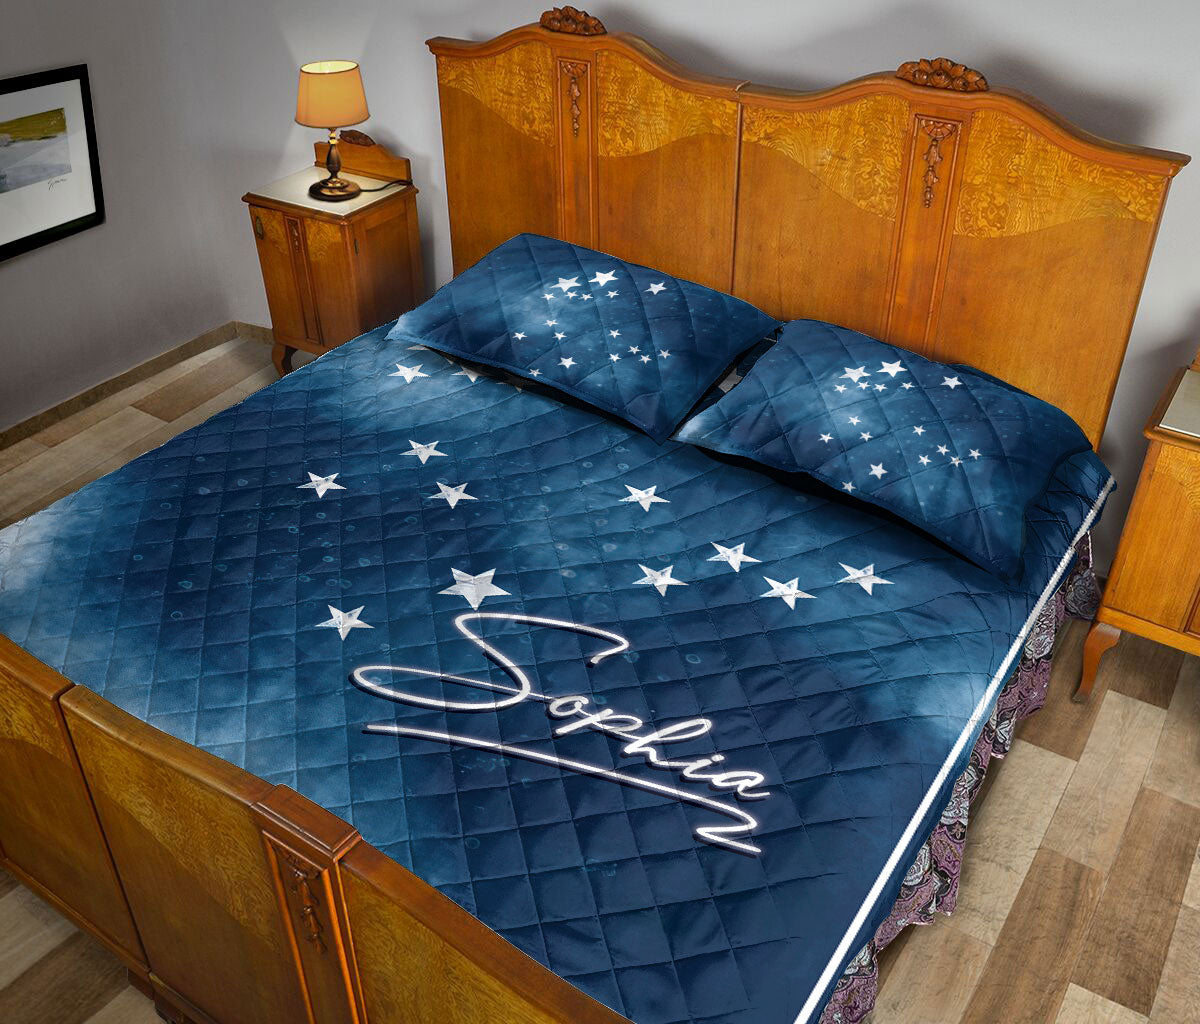 Ohaprints-Quilt-Bed-Set-Pillowcase-Gemini-Zodiac-Sign-Astrology-Horoscopes-Celestrial-Custom-Personalized-Name-Blanket-Bedspread-Bedding-71-Queen (80'' x 90'')